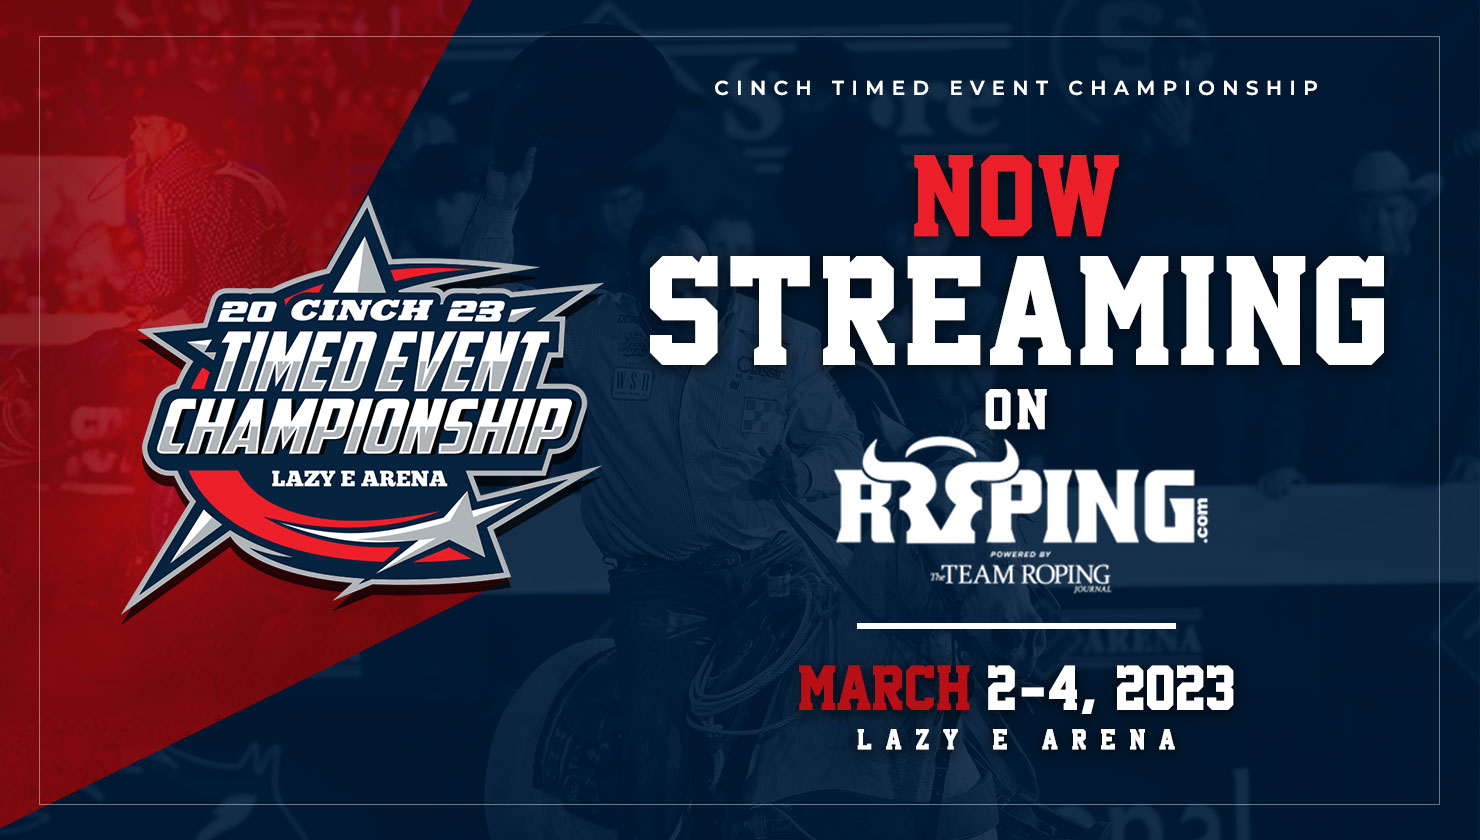 Everything to Know About the 2023 Cinch Timed Event Championship